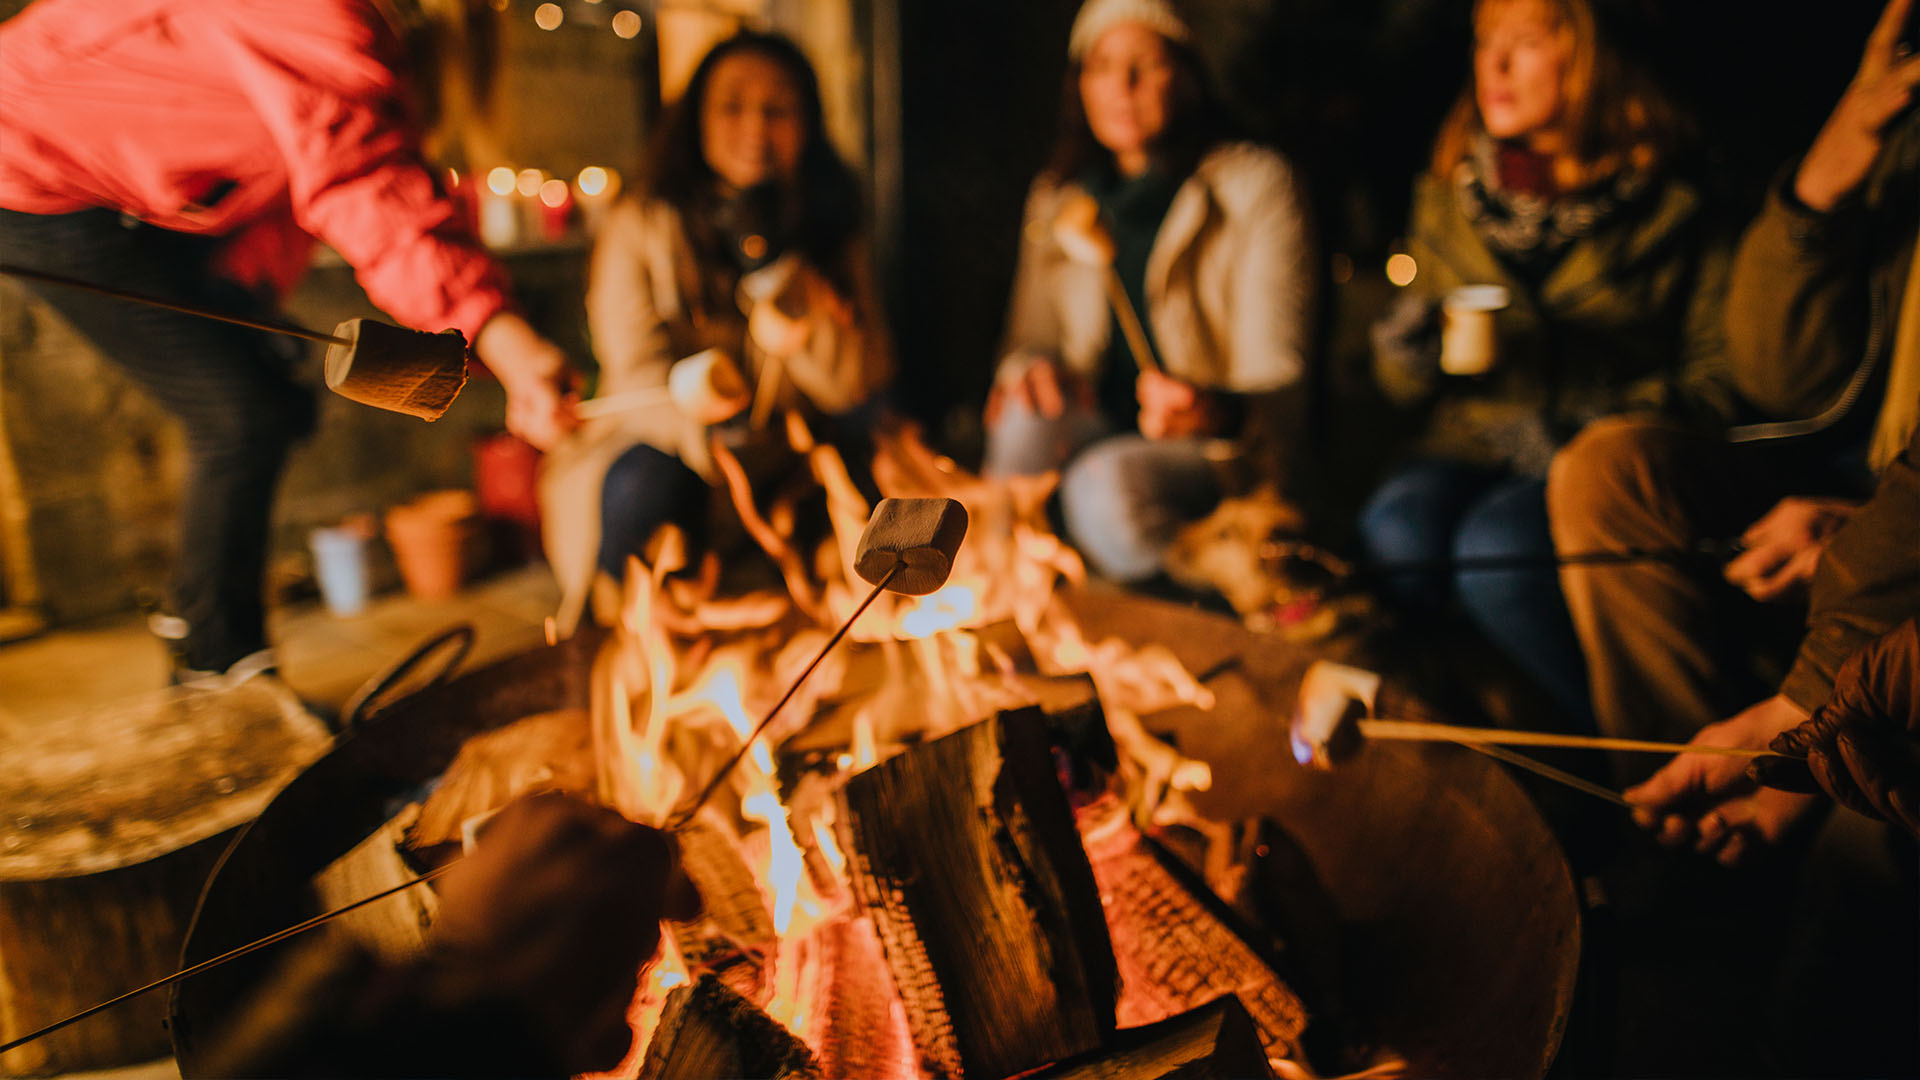 Roasting Marshmallows in Fire Pit | CPI Security Blog